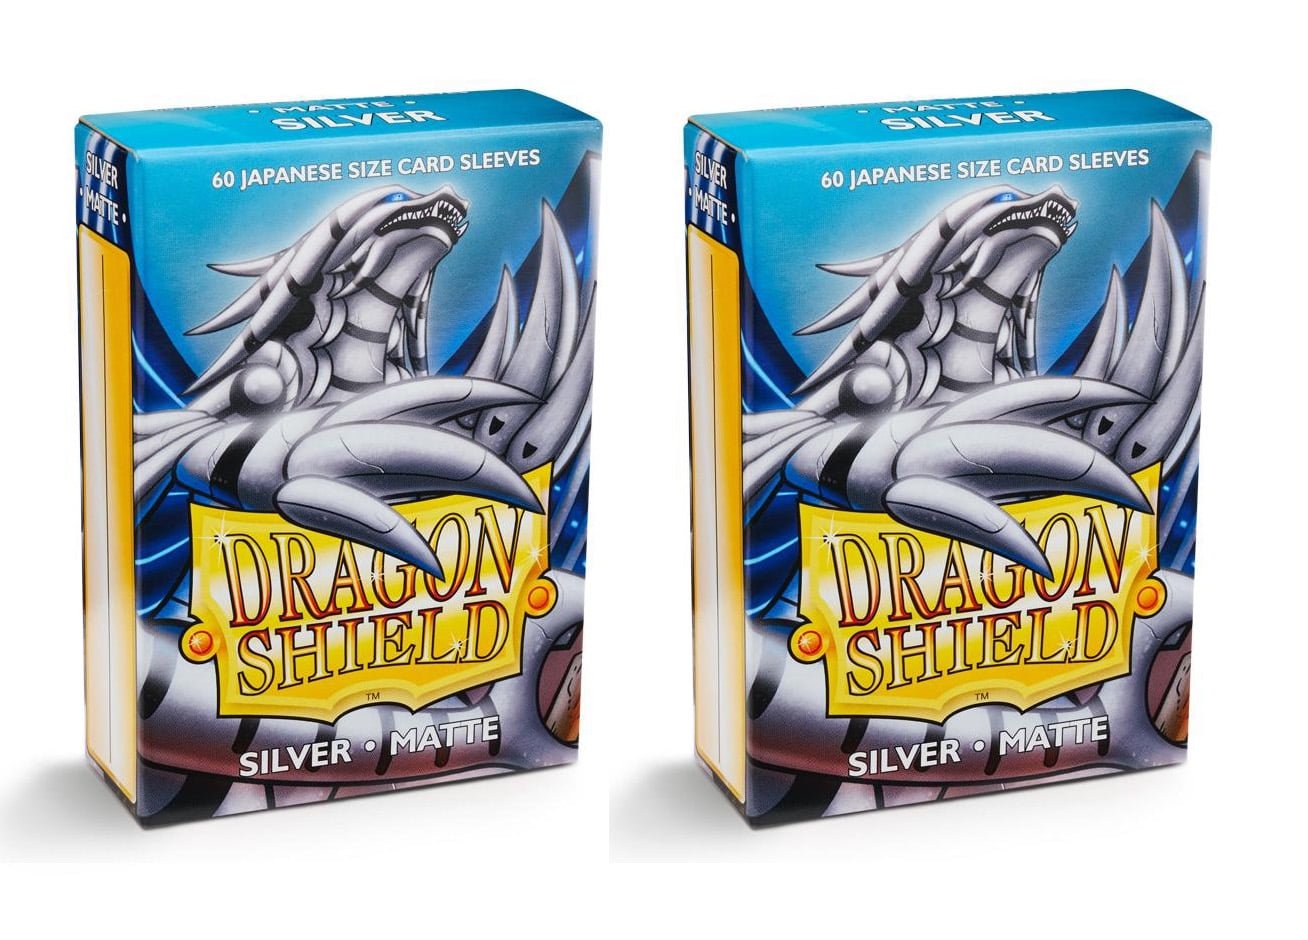 Details about   10 Packs Dragon Shield Matte Mini Japanese Clear 60 ct Card Sleeves Display Case 